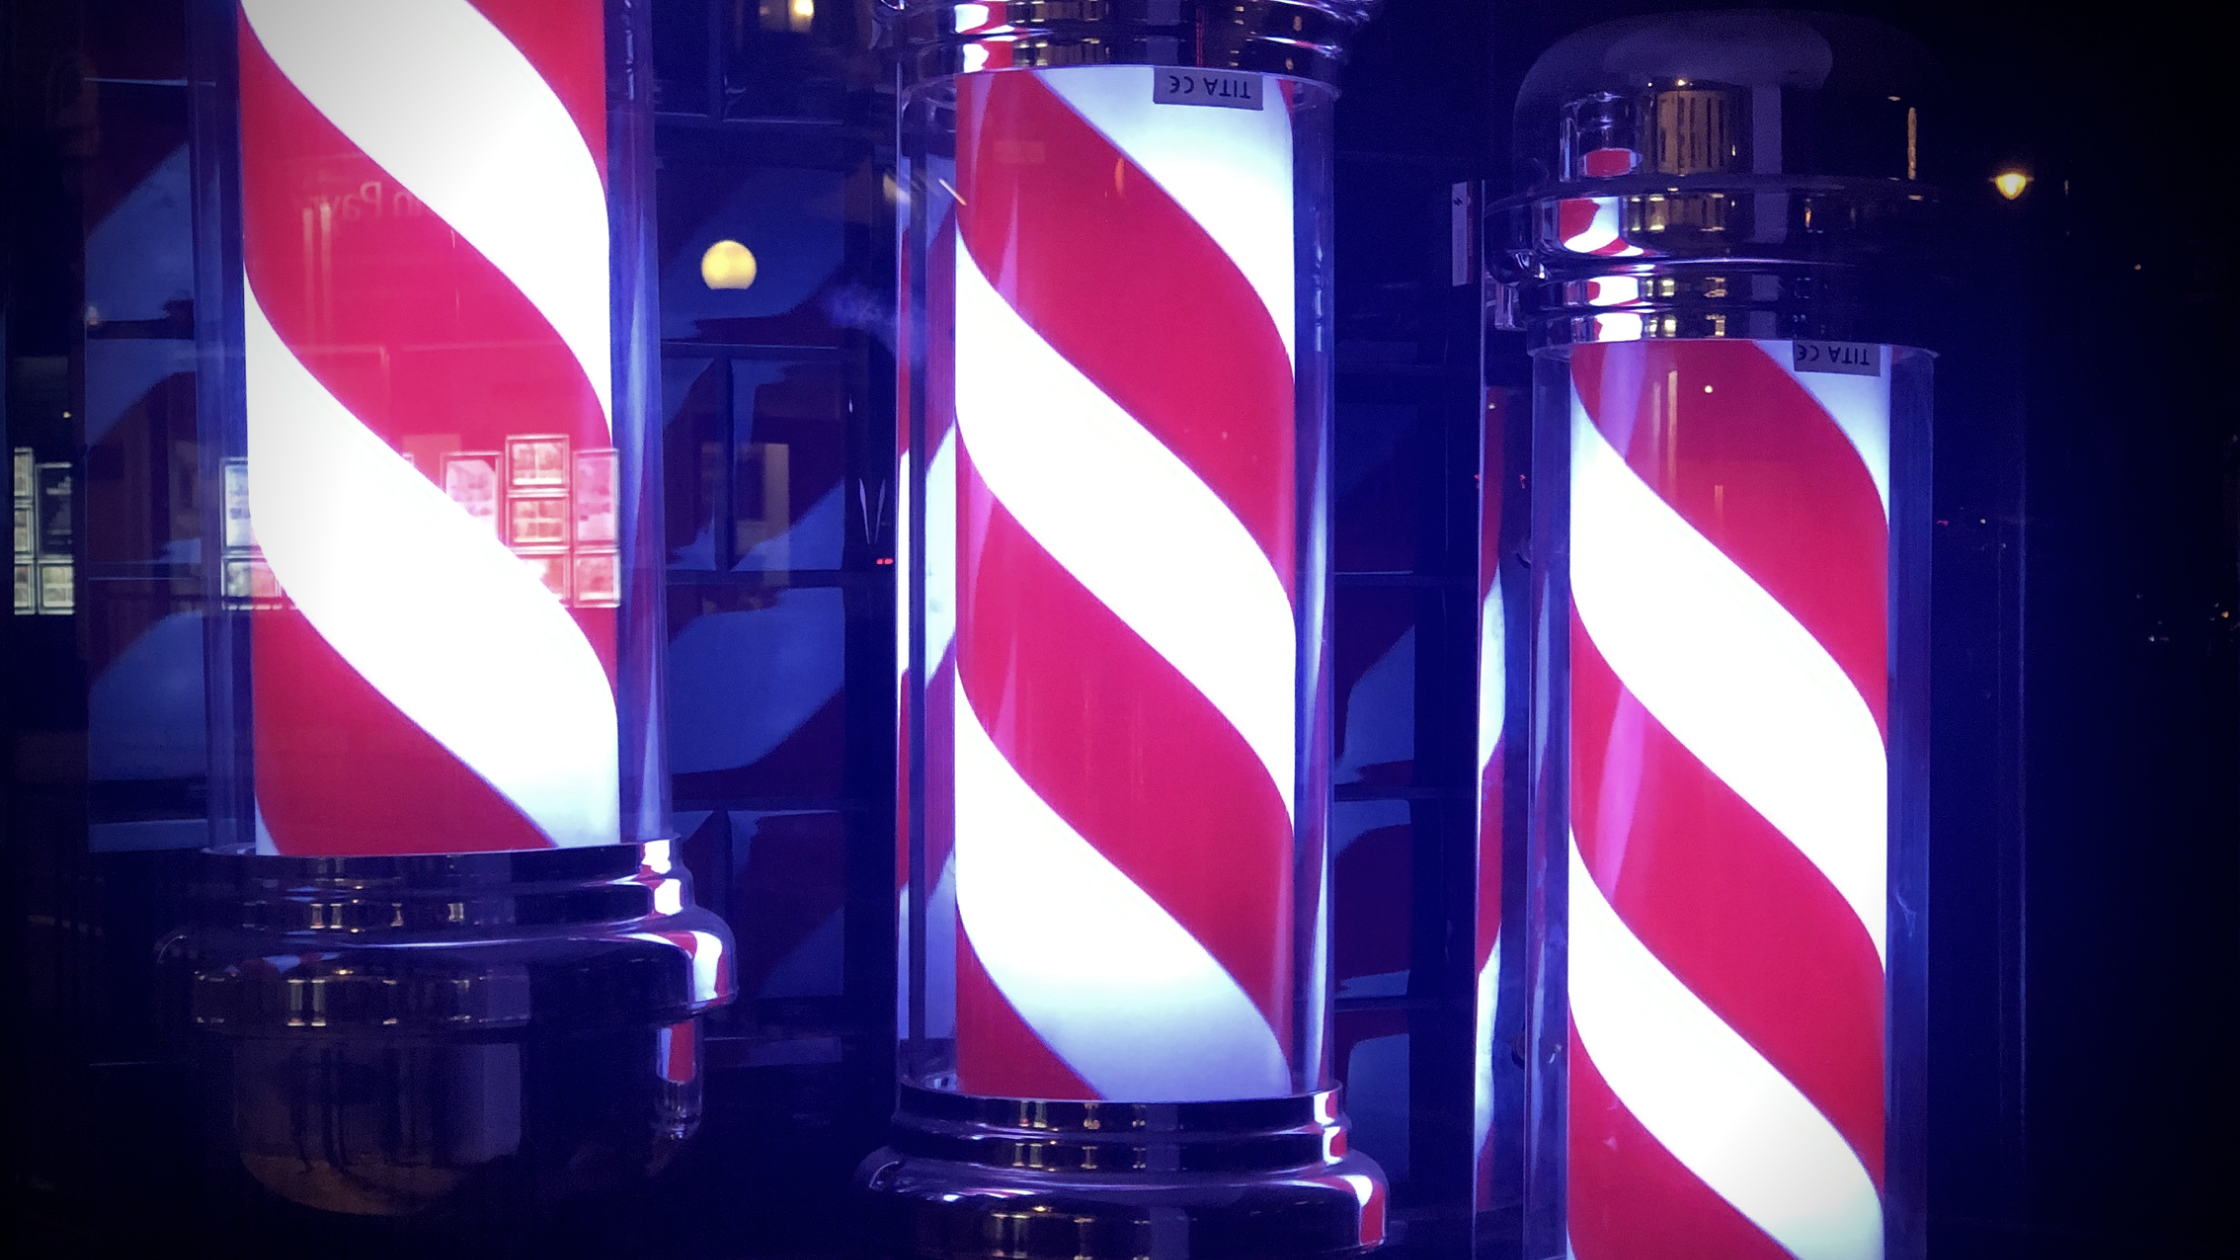 A Spooky Story Behind The Barber’s Pole